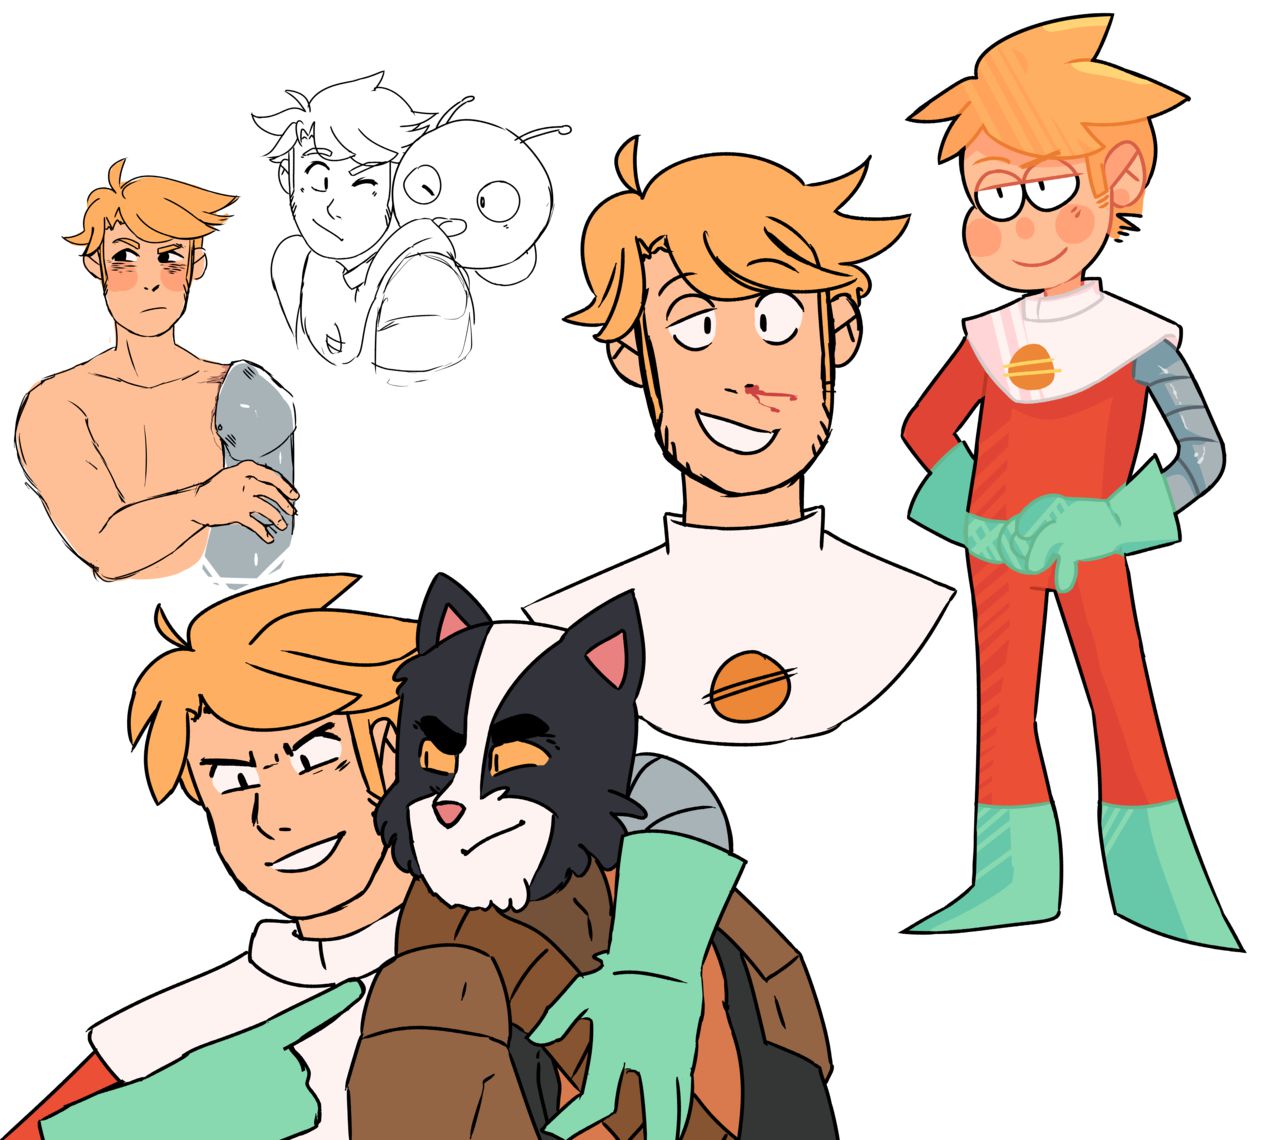 Final Space gay pic (various artists) 20